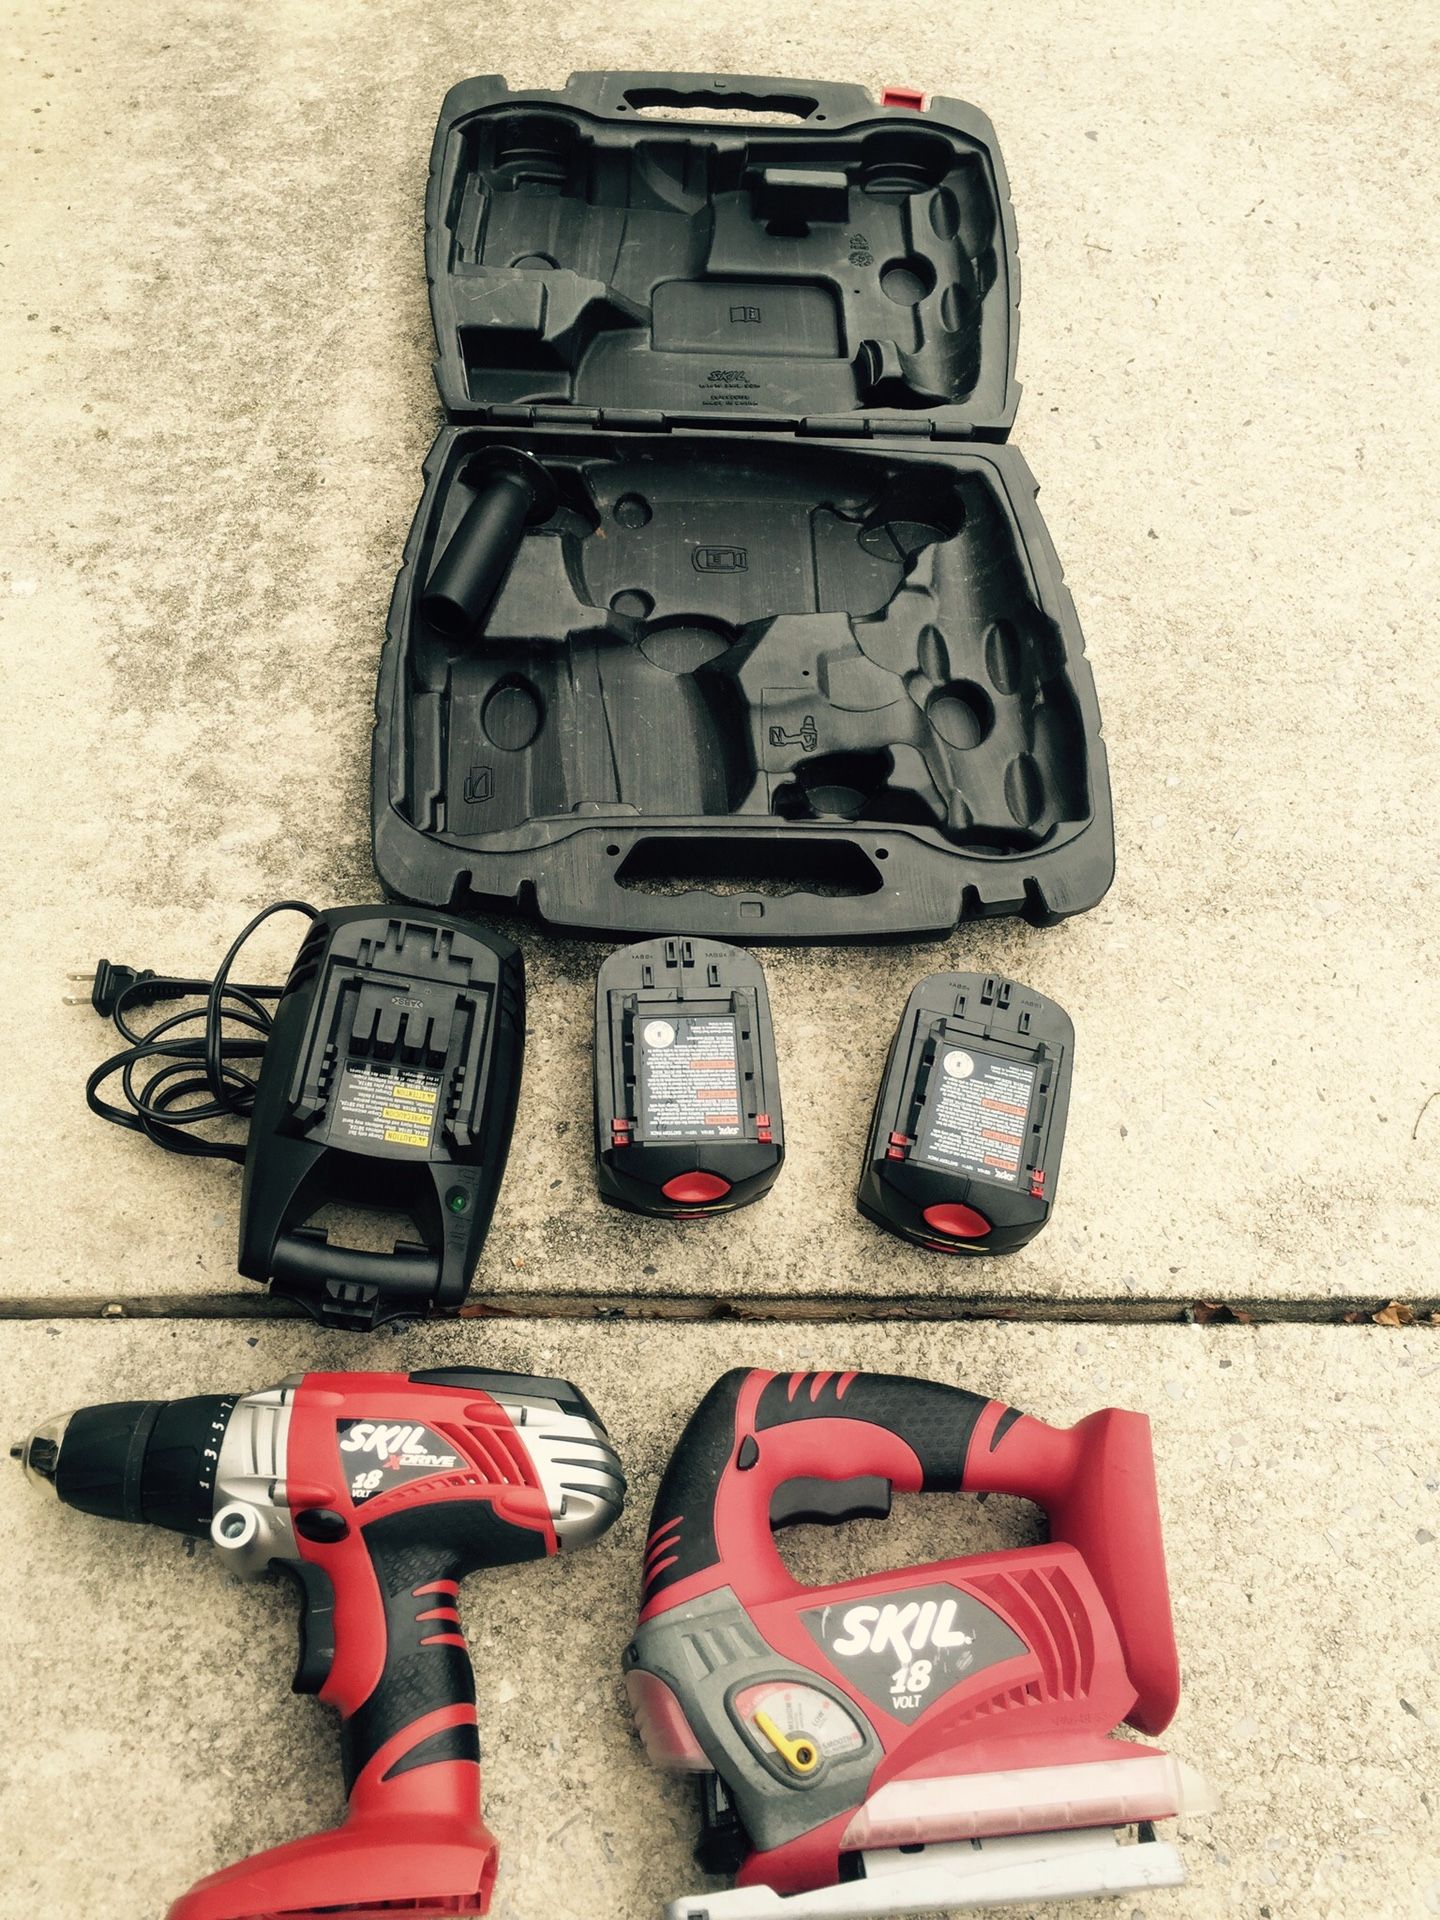 For sale Skill drill and jigsaw